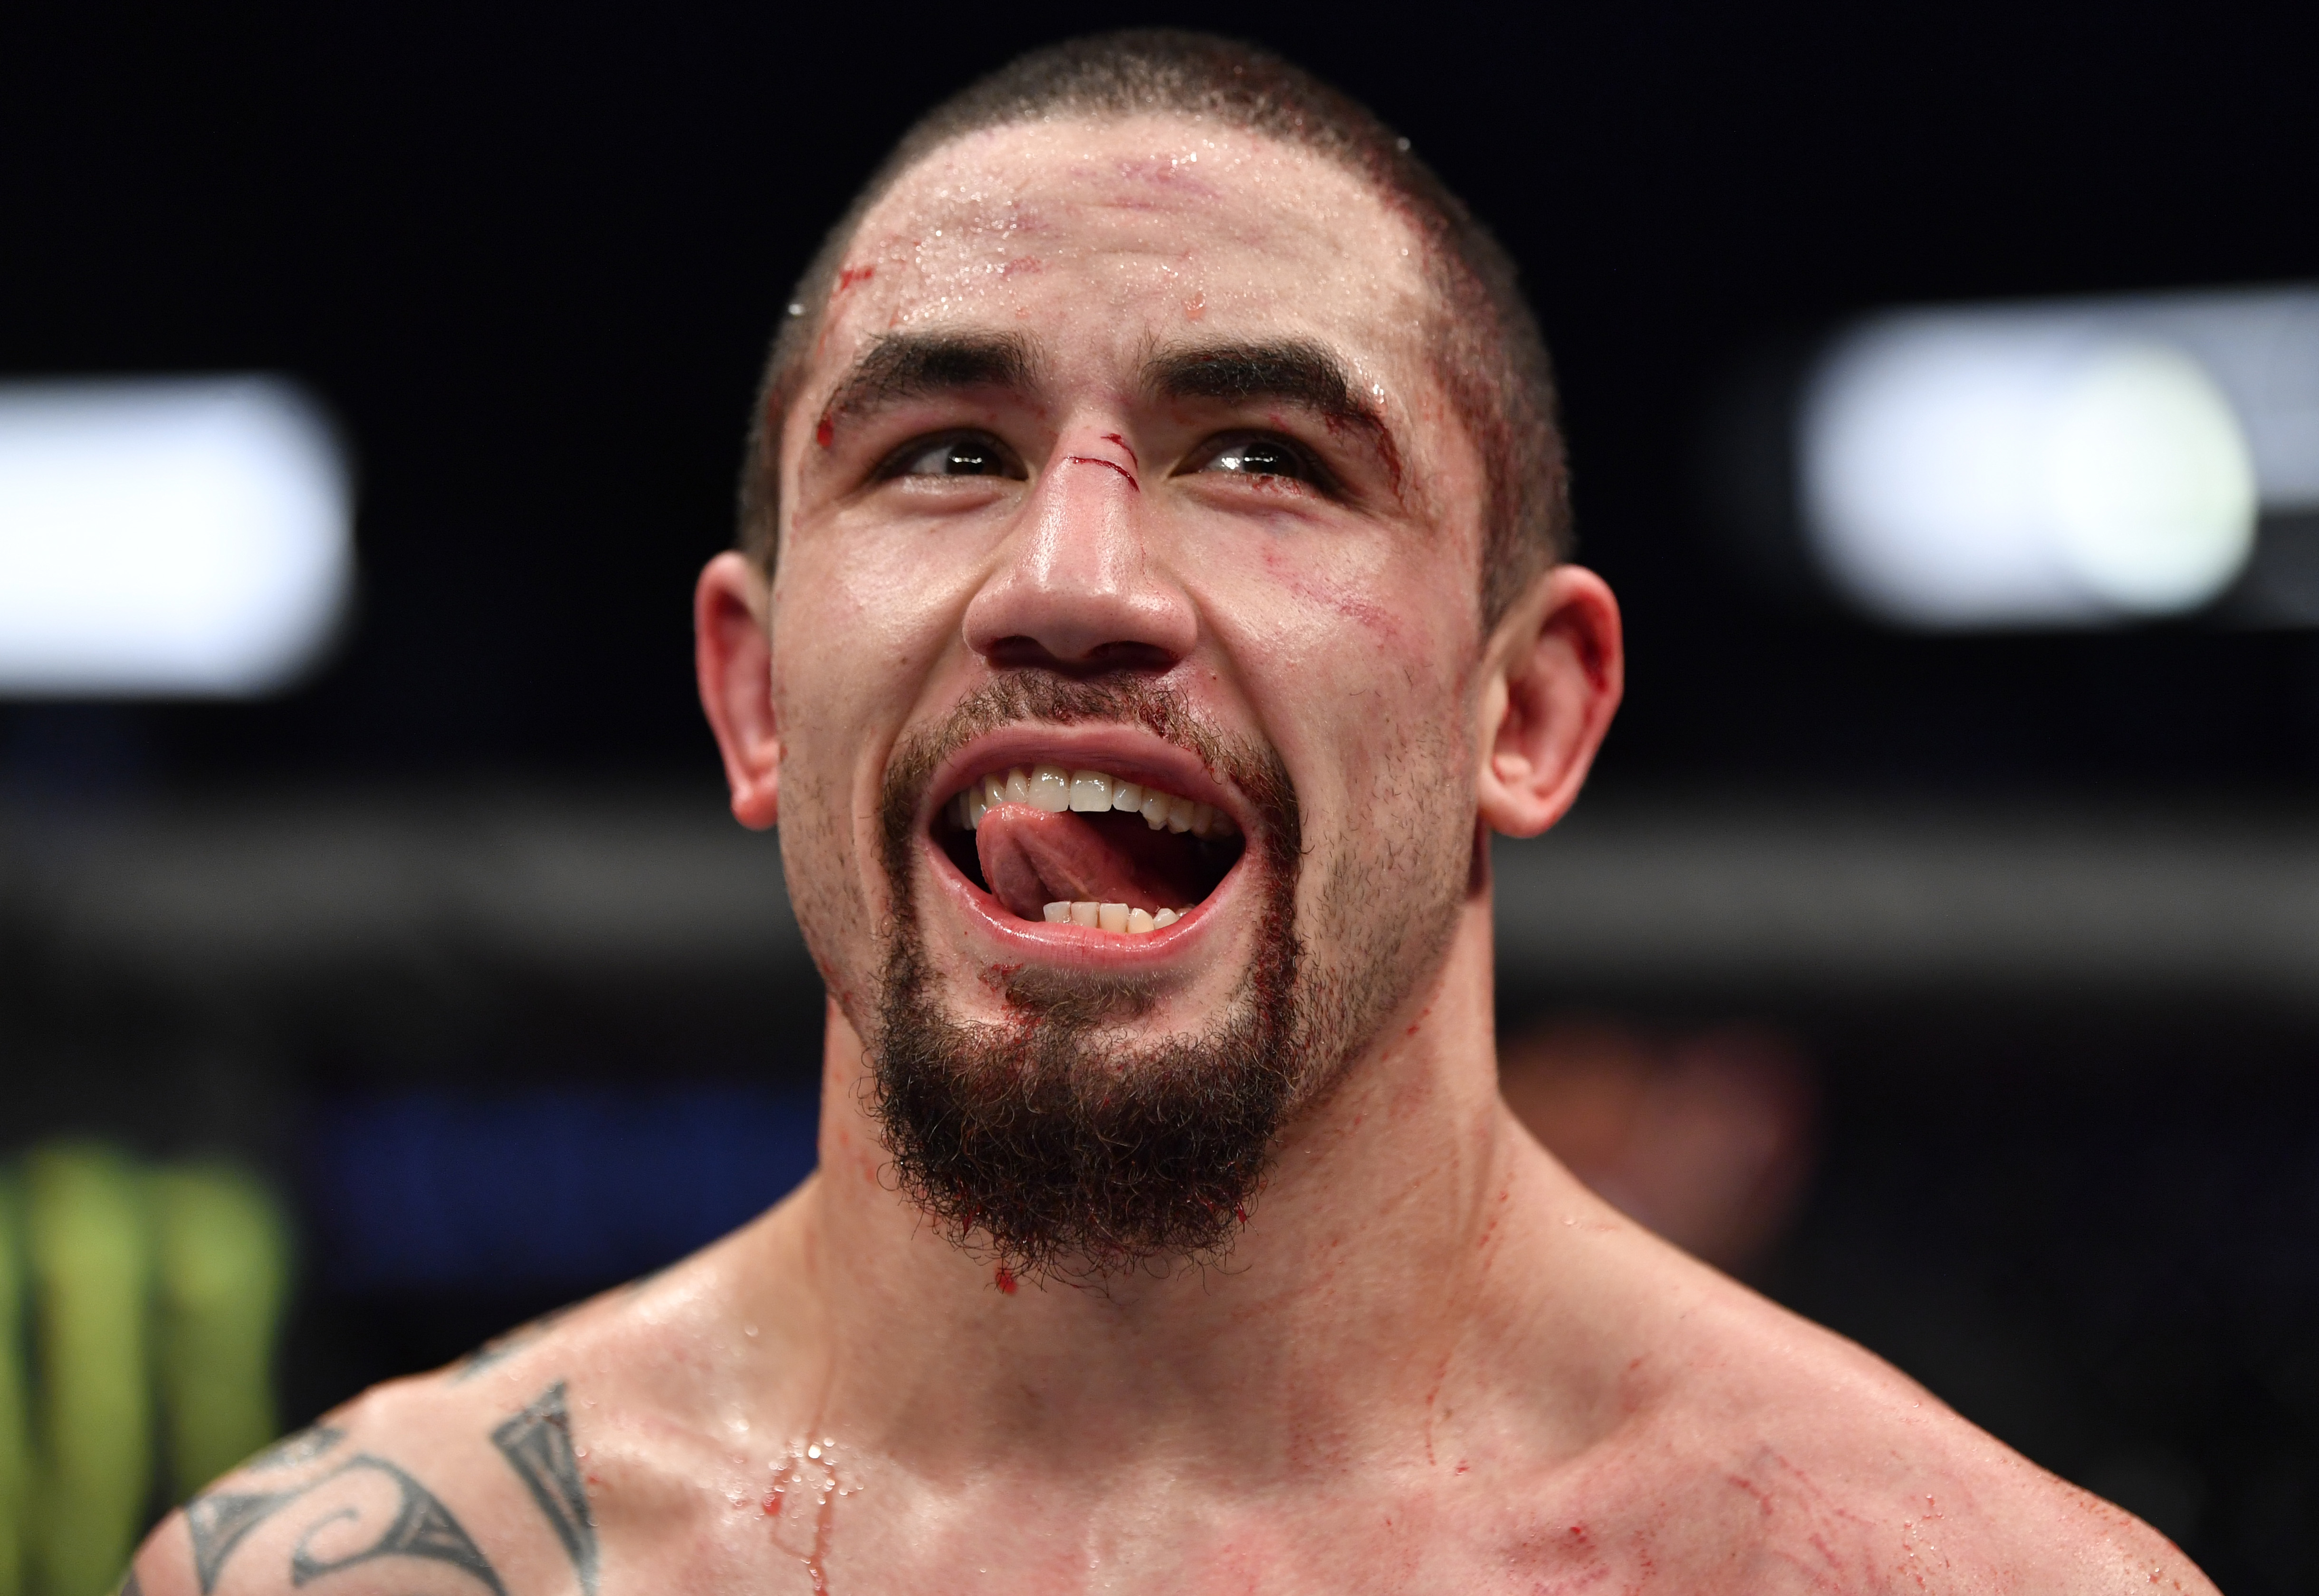 Robert Whittaker reacts after the conclusion of his middleweight fight against Darren Till